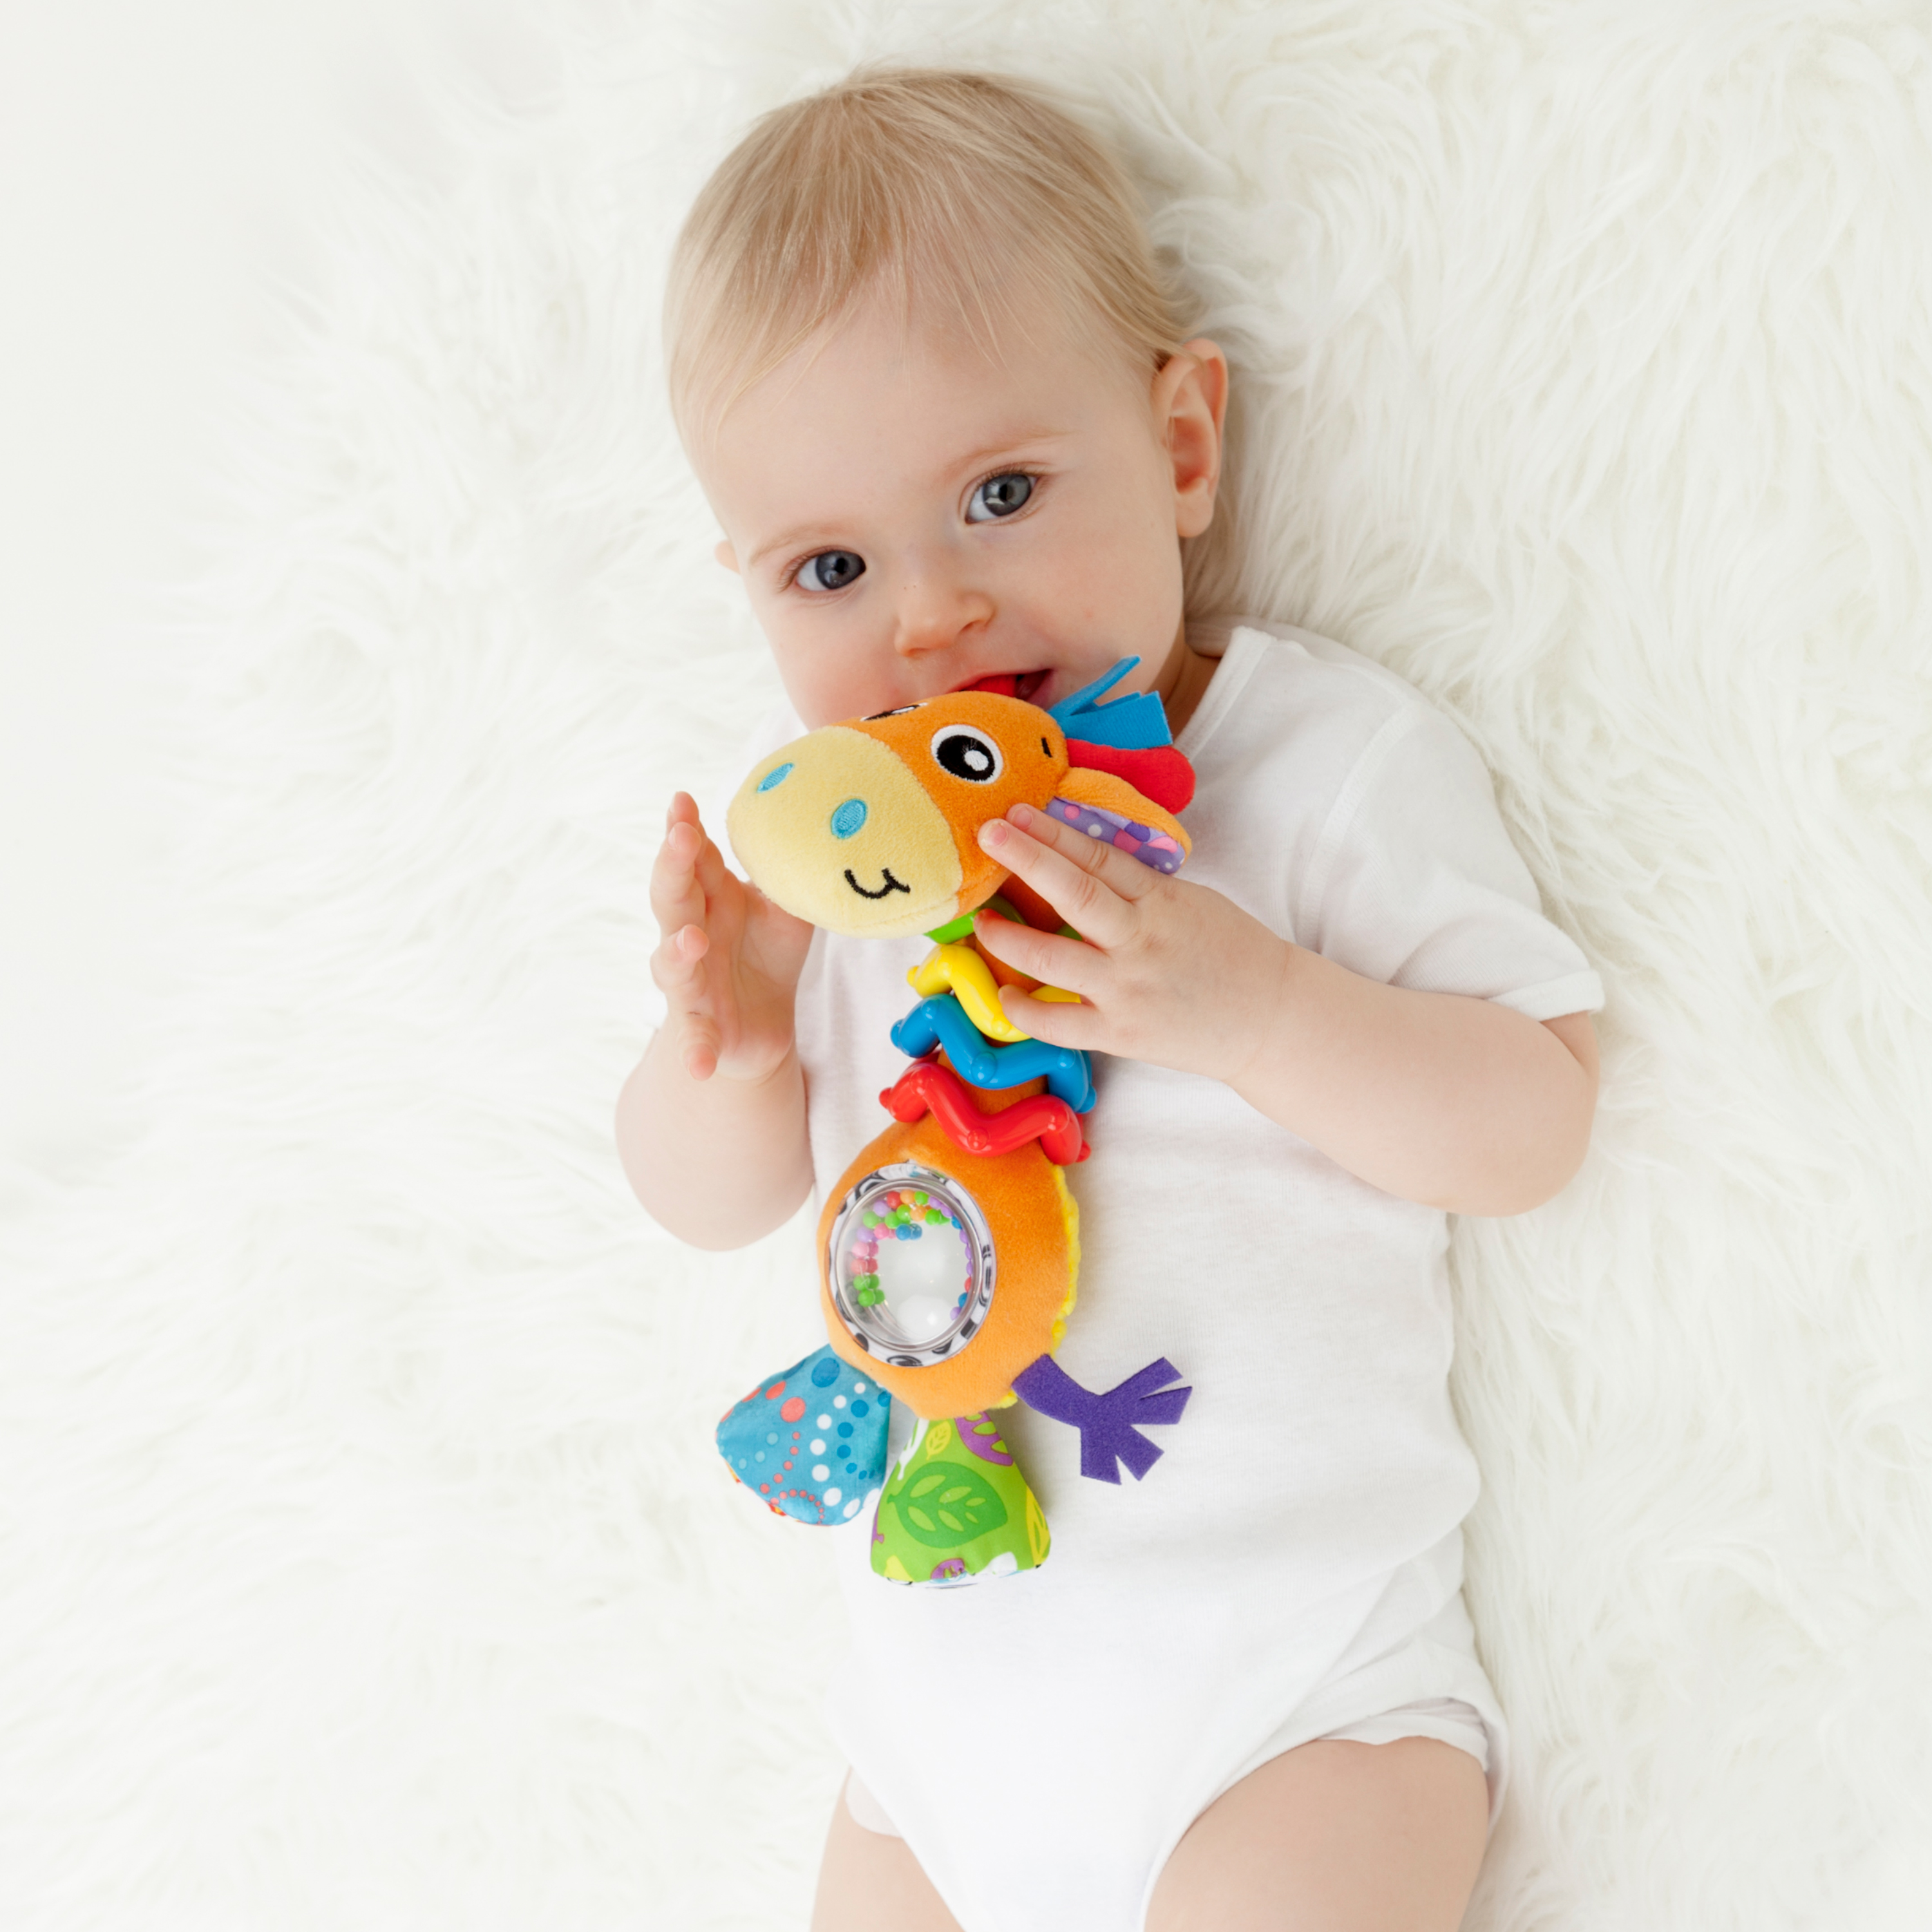 Playgro Bead Buddy Giraffe Baby Rattling and Teething Toy, 3 Months and Up - image 3 of 8